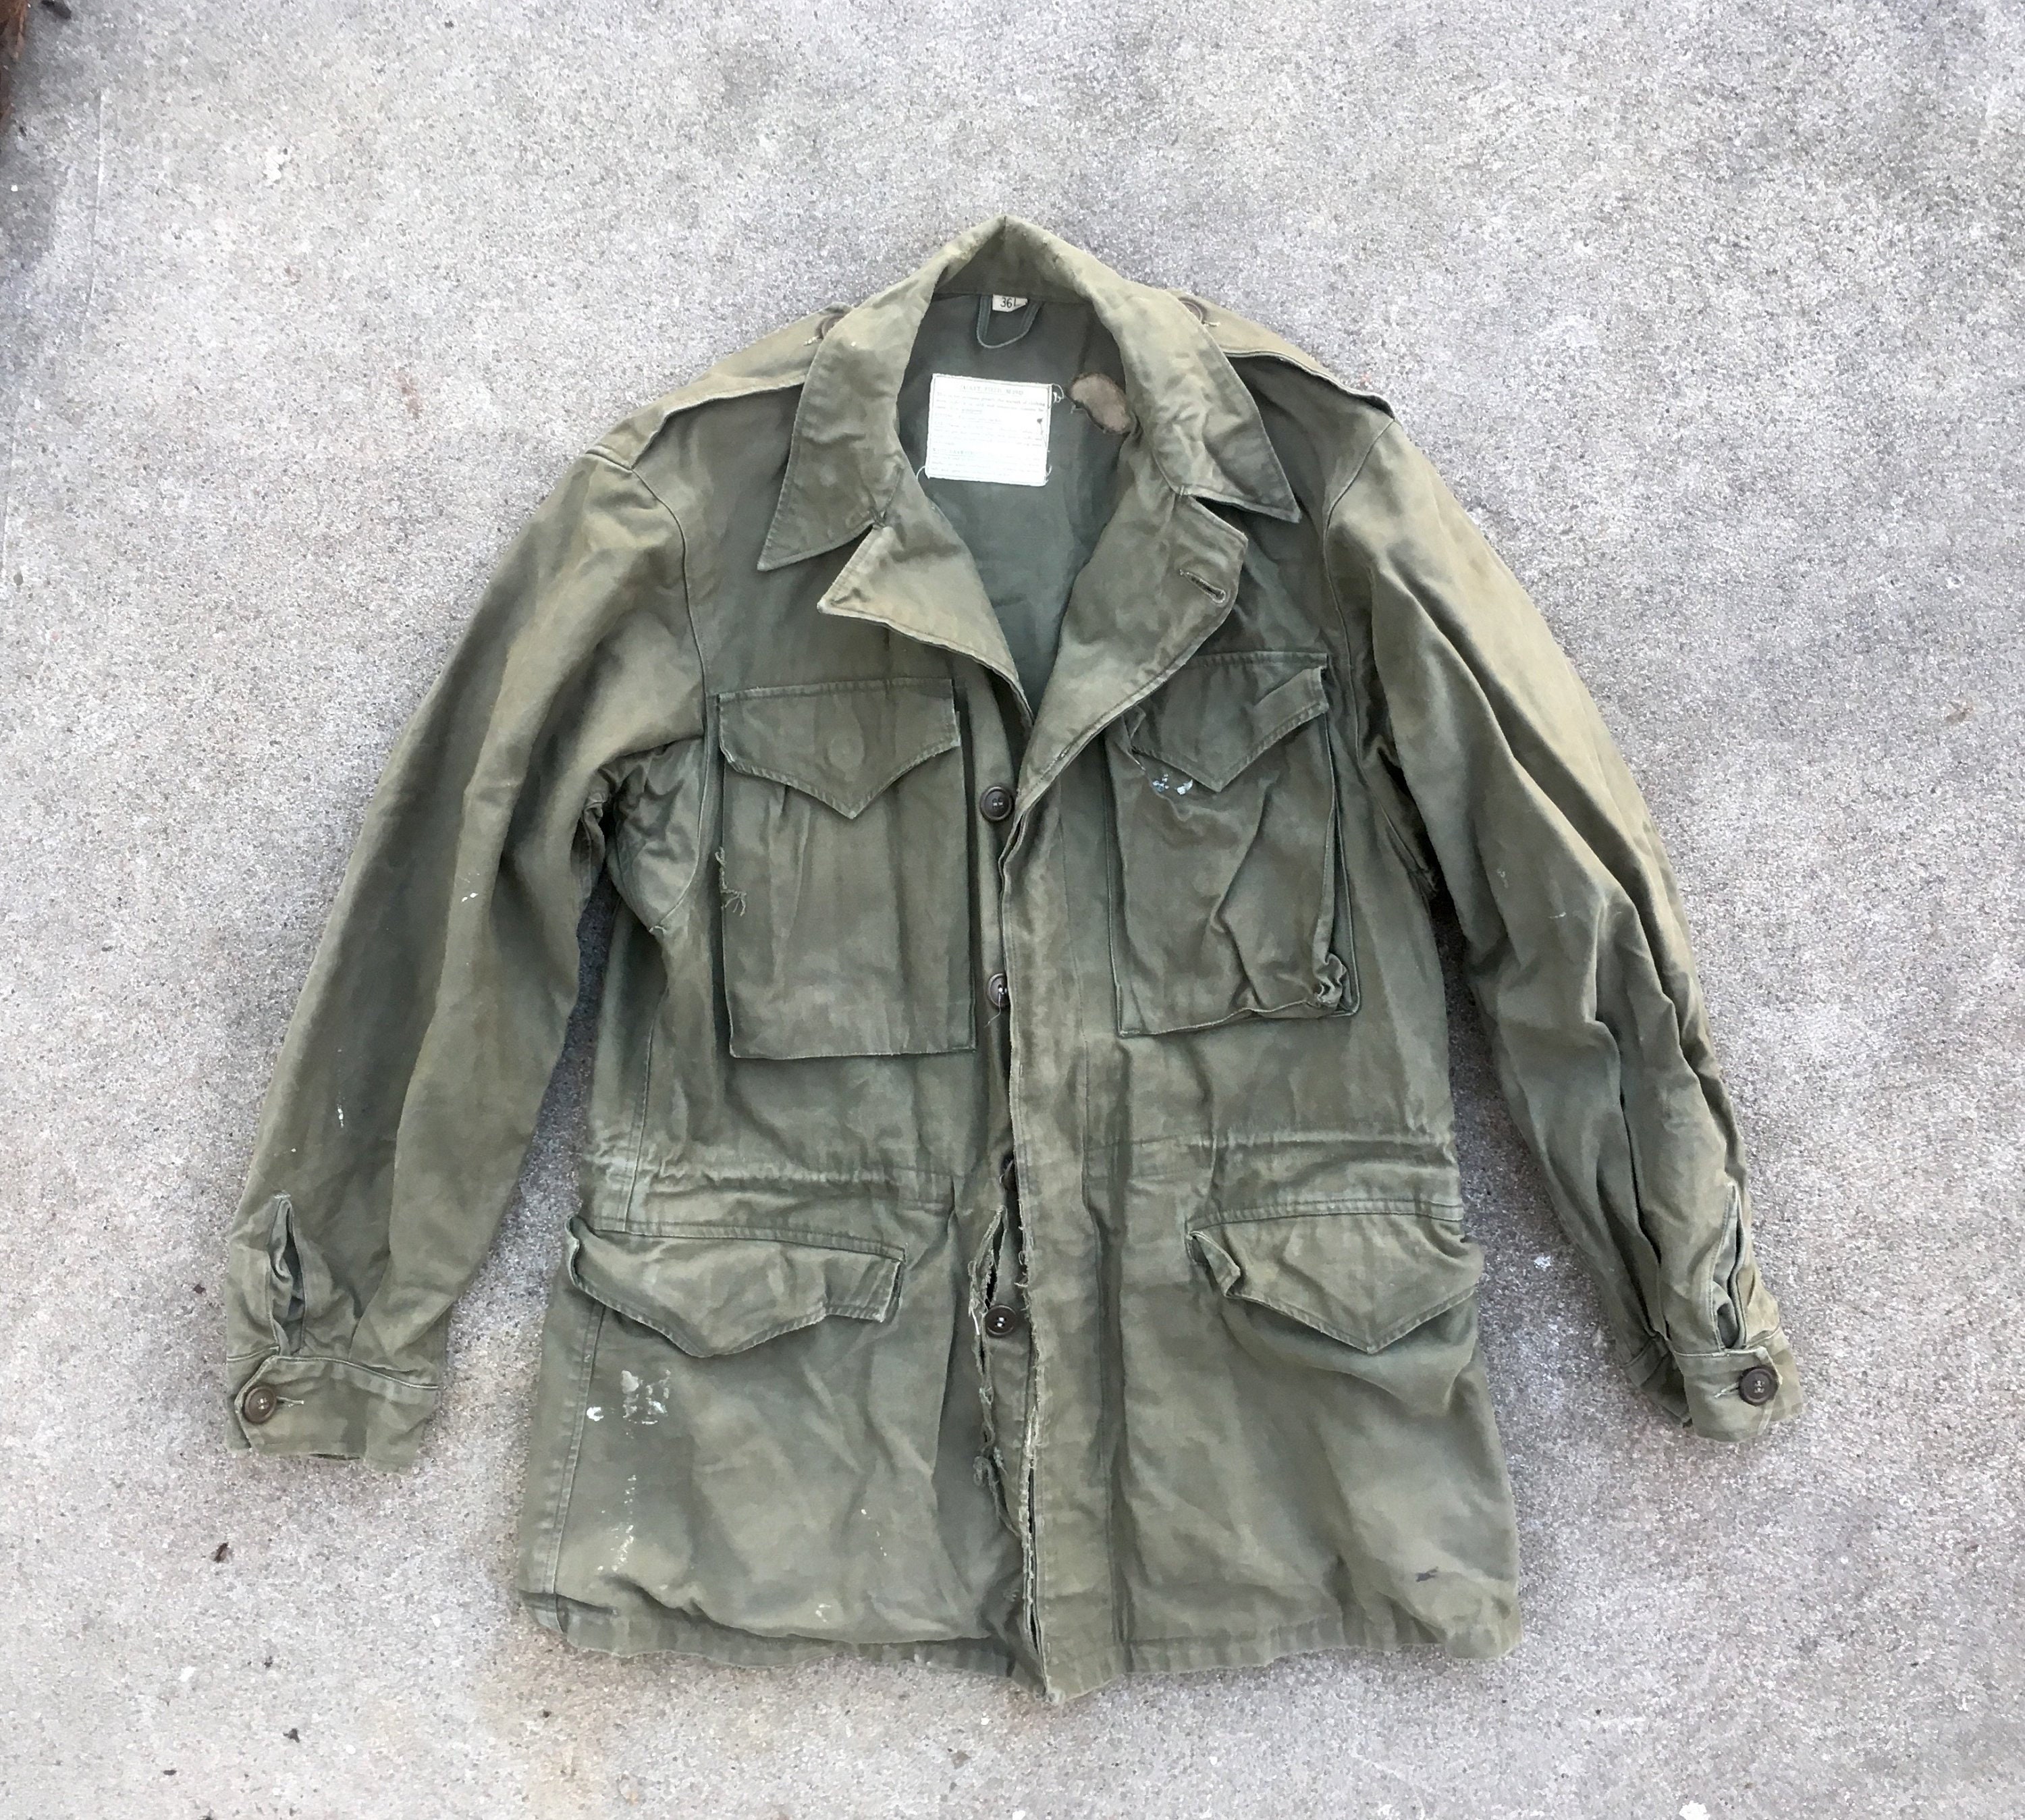 M41 Jacket for sale | Only 2 left at -60%